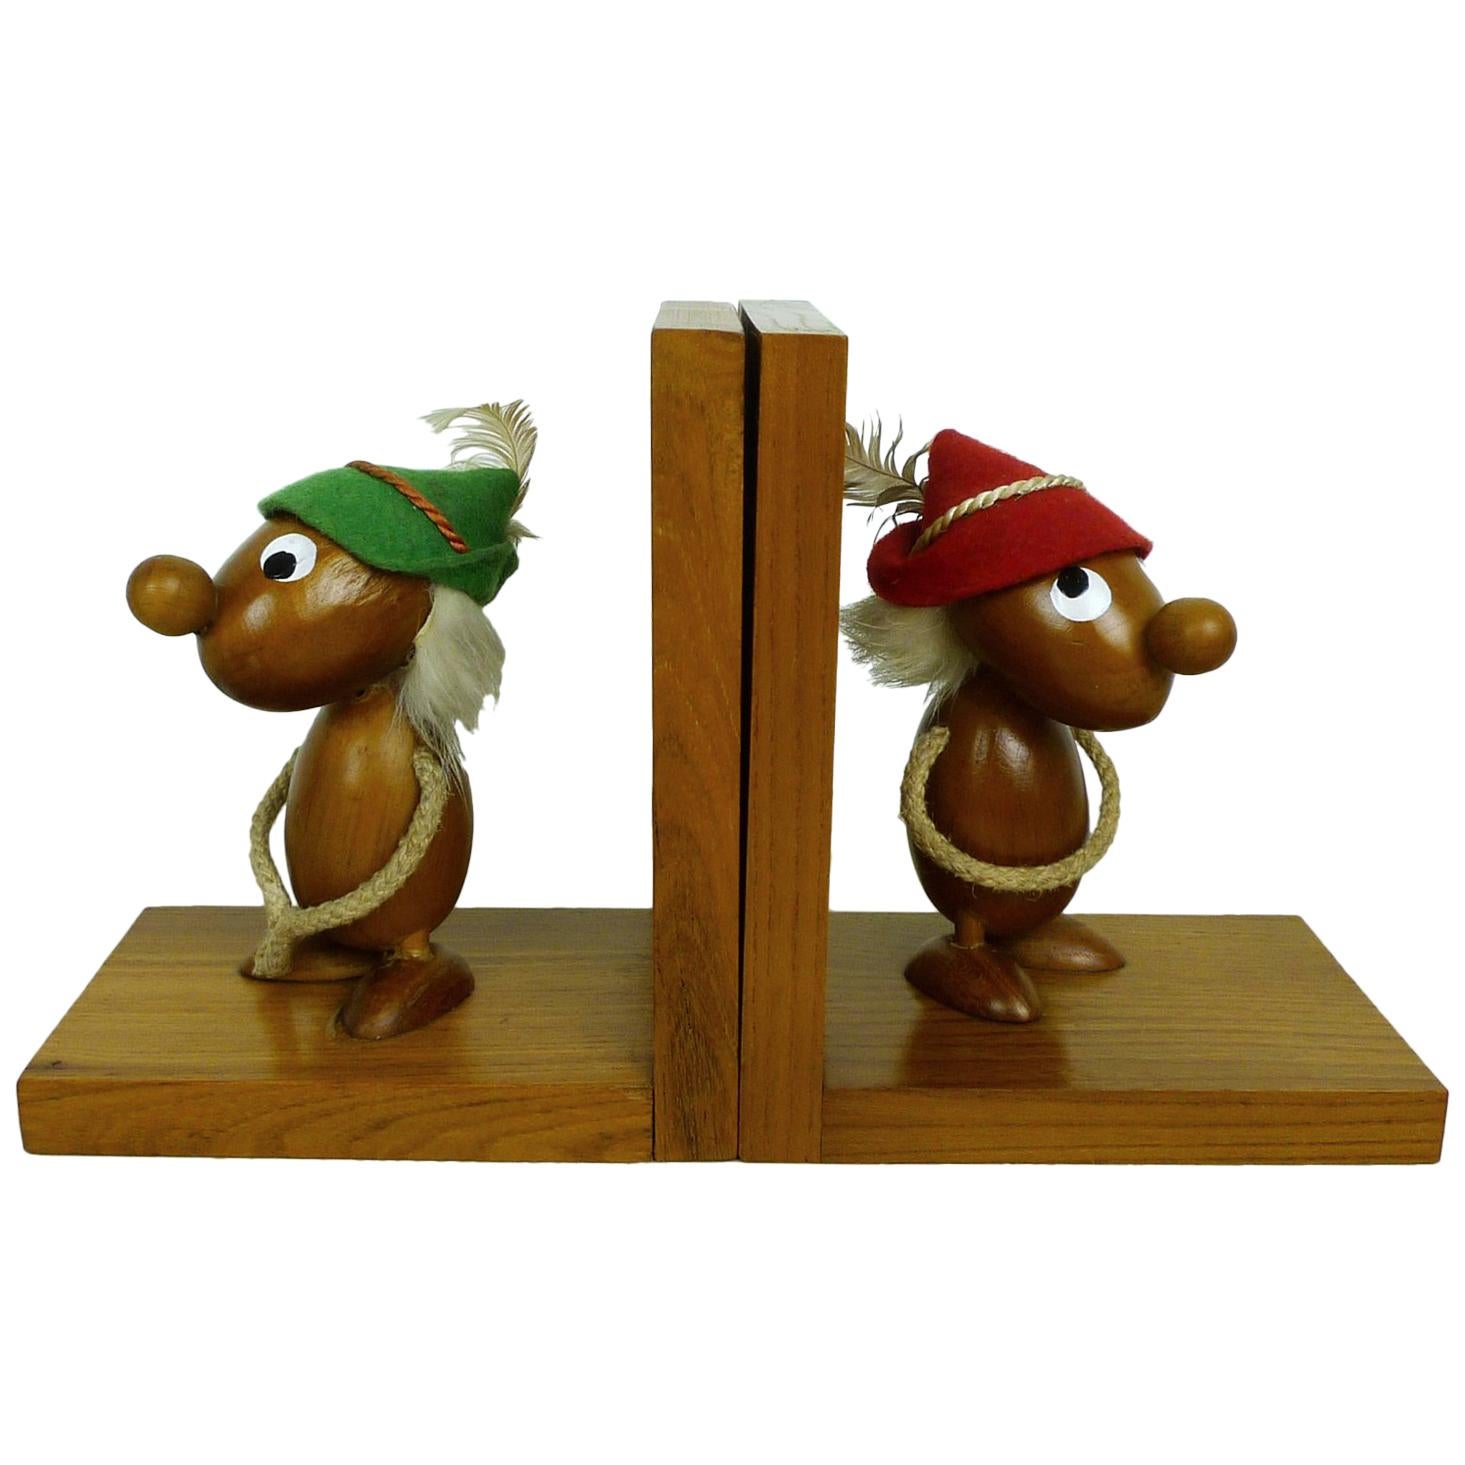 Pair of Italian Bookends with Teak Figurines from Ciola, 1950s For Sale